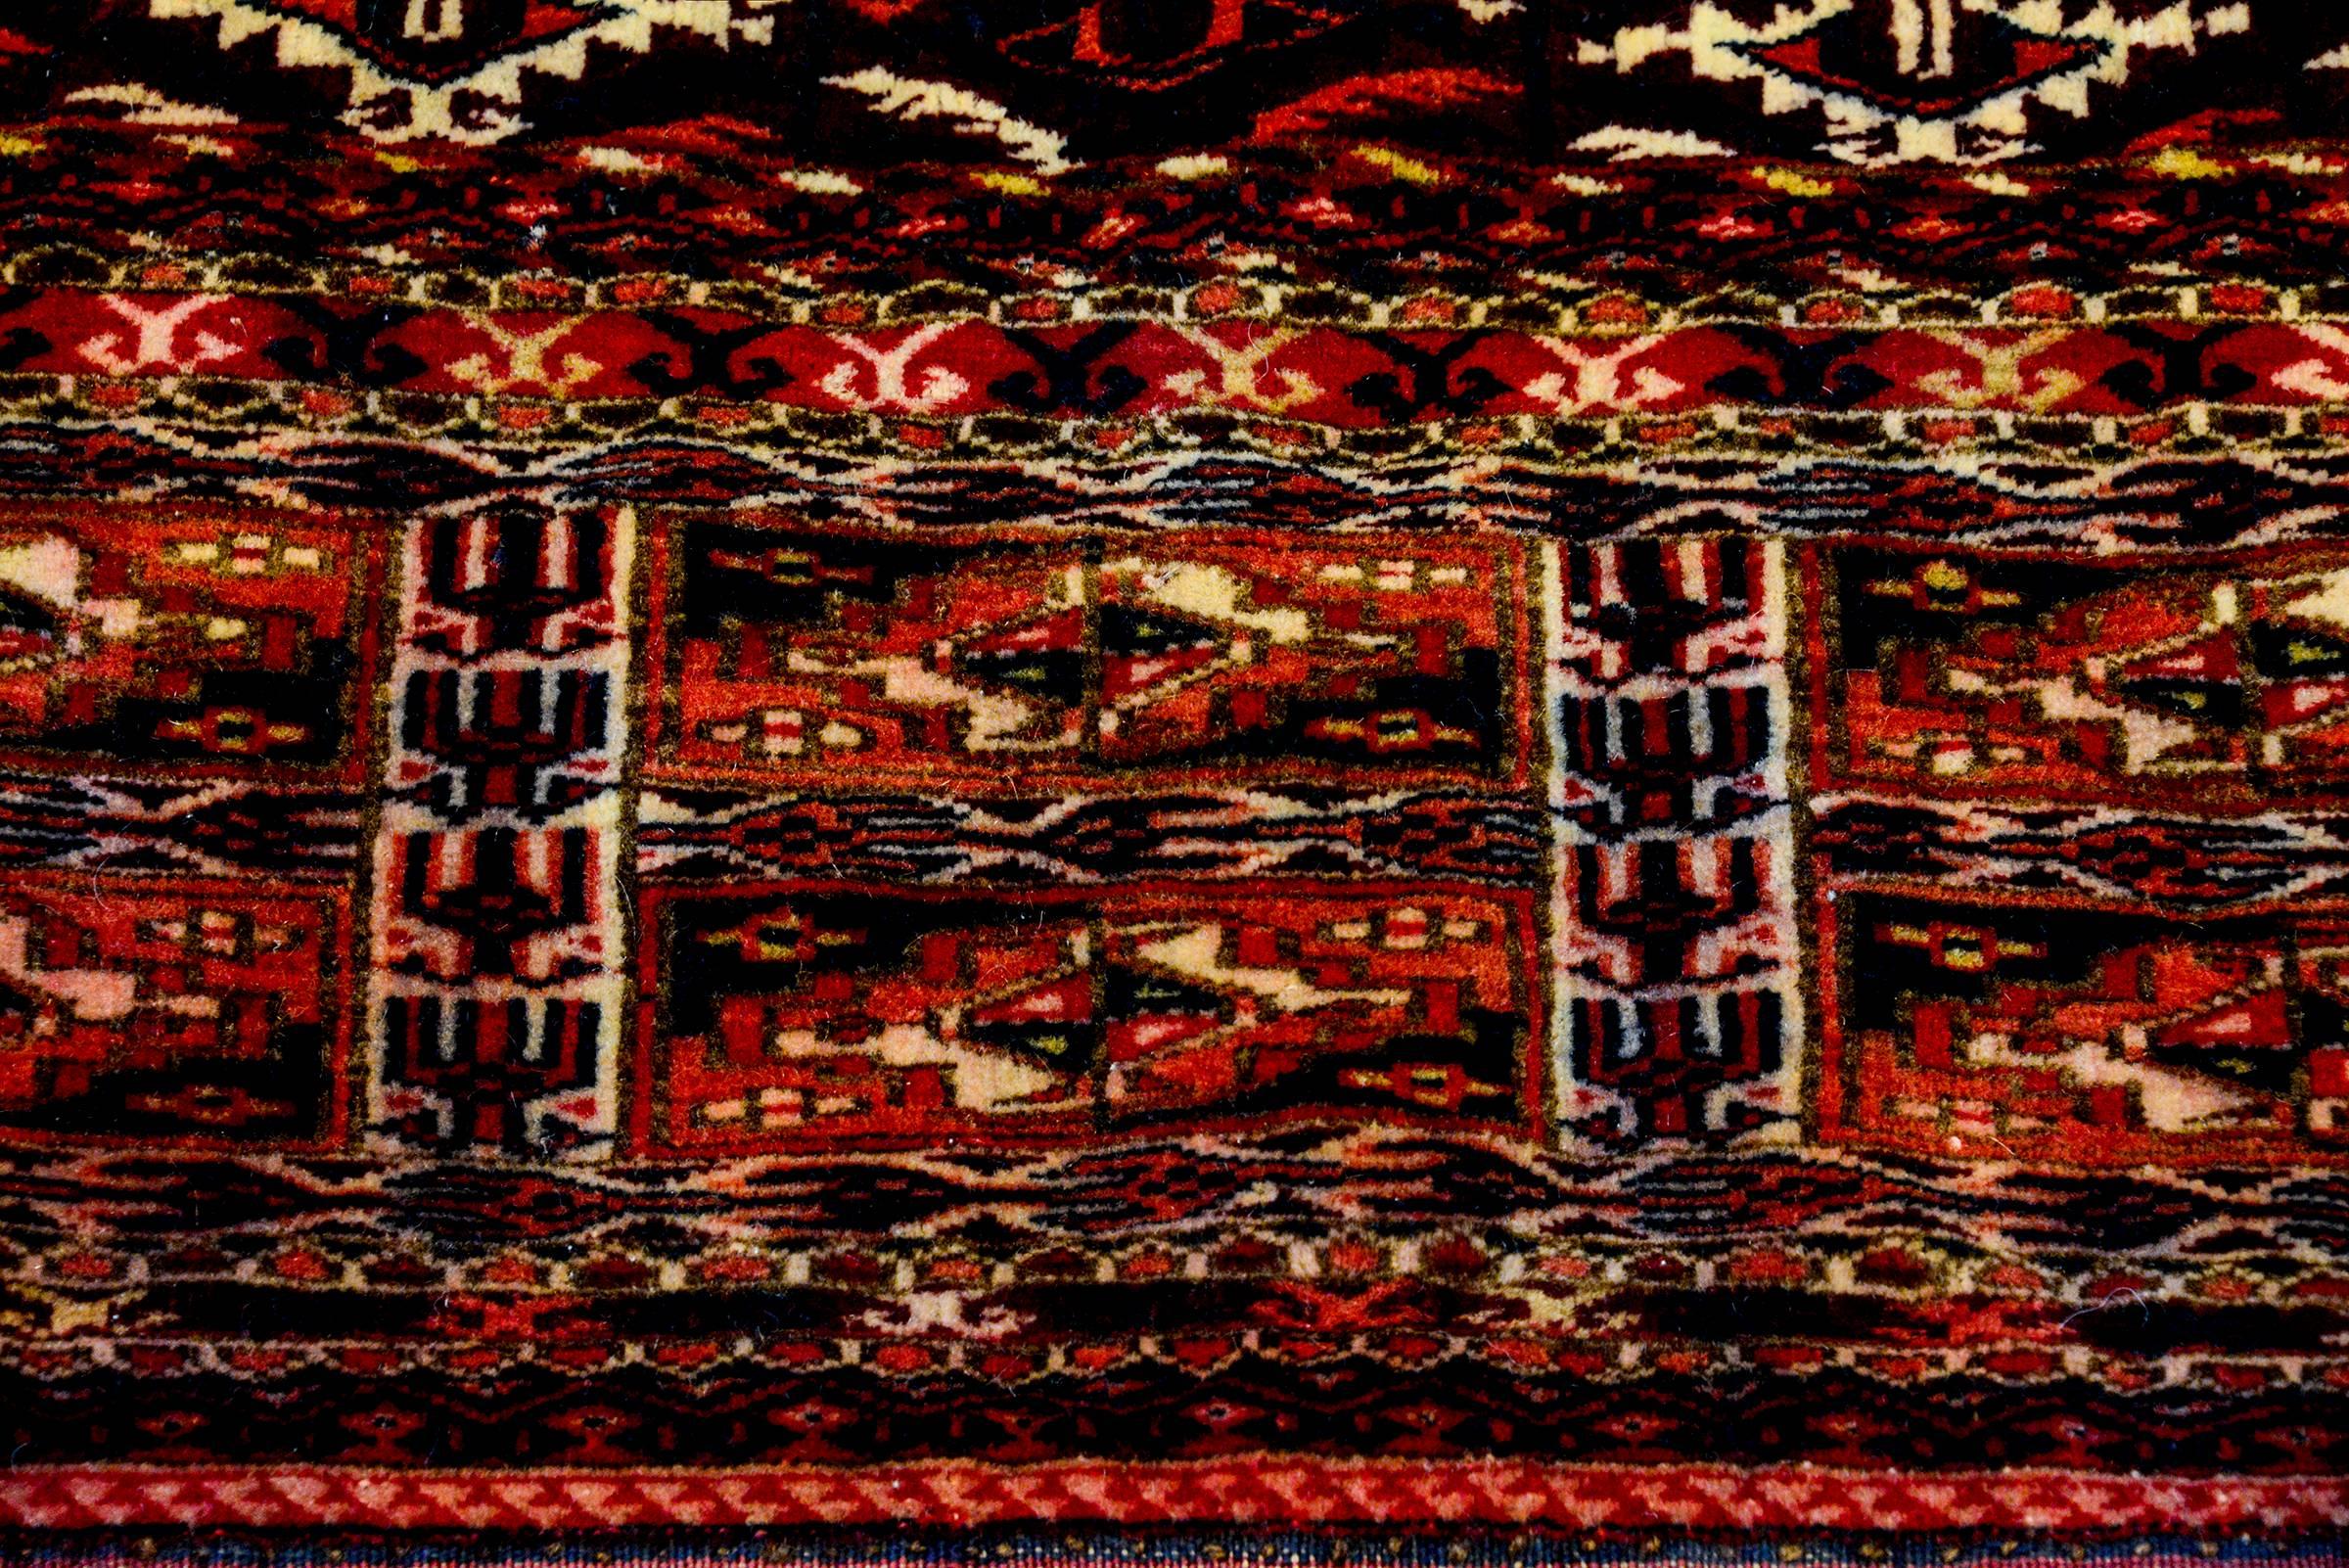 A wonderful early 20th century Persian Turkmen face rug with a densely woven geometric pattern woven in crimson and indigo and natural wool, with a wide complimentary geometric border. One side has long multicolored fringe.